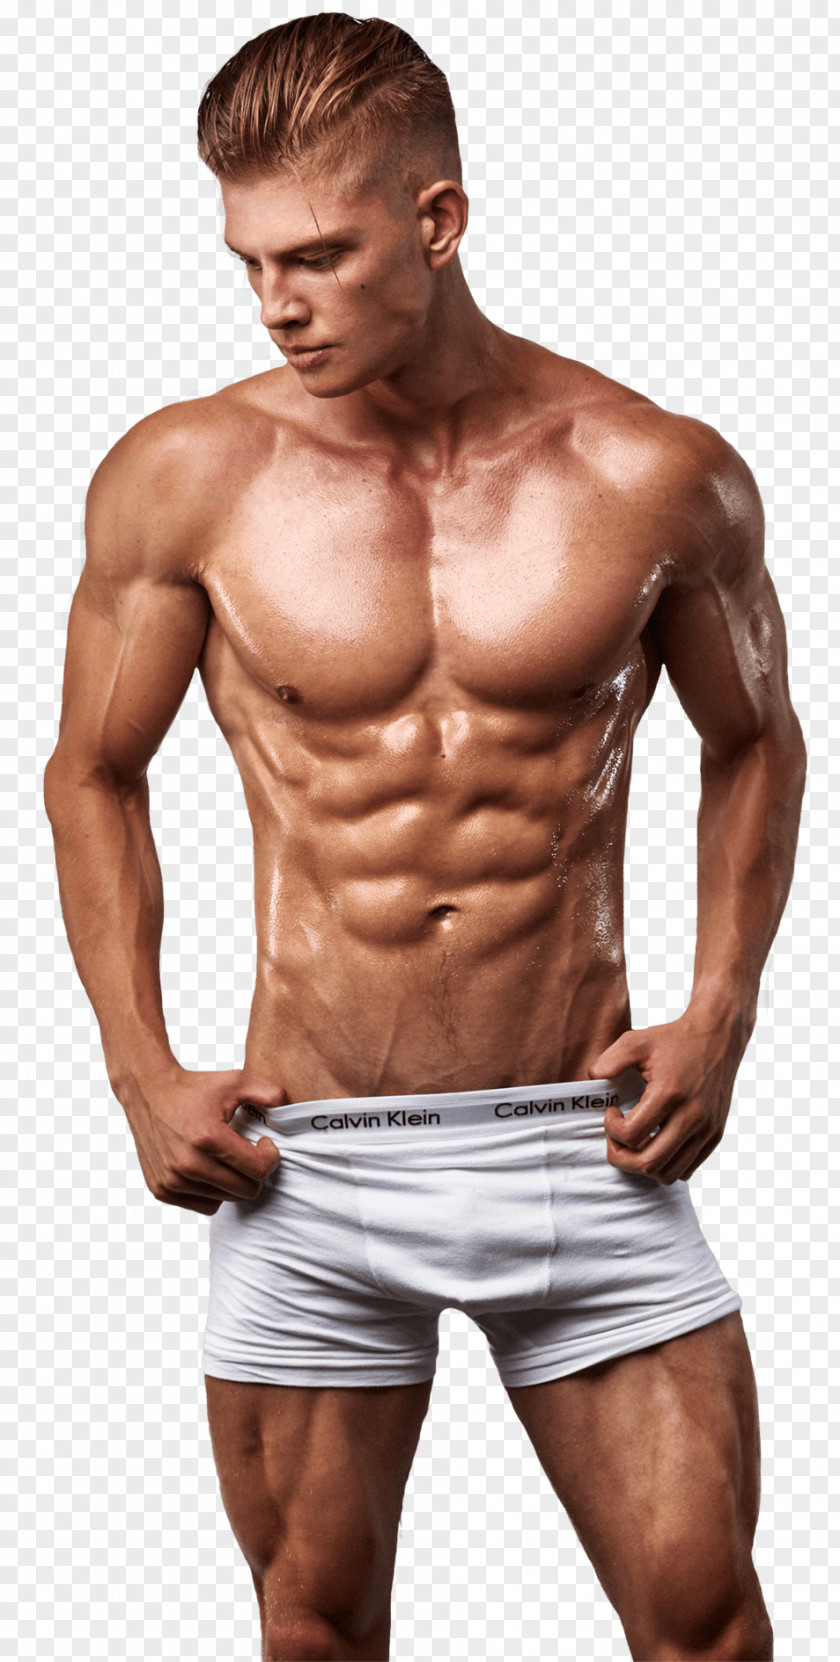 Aesthetics Student Clothing Bodybuilding Physical Fitness PNG